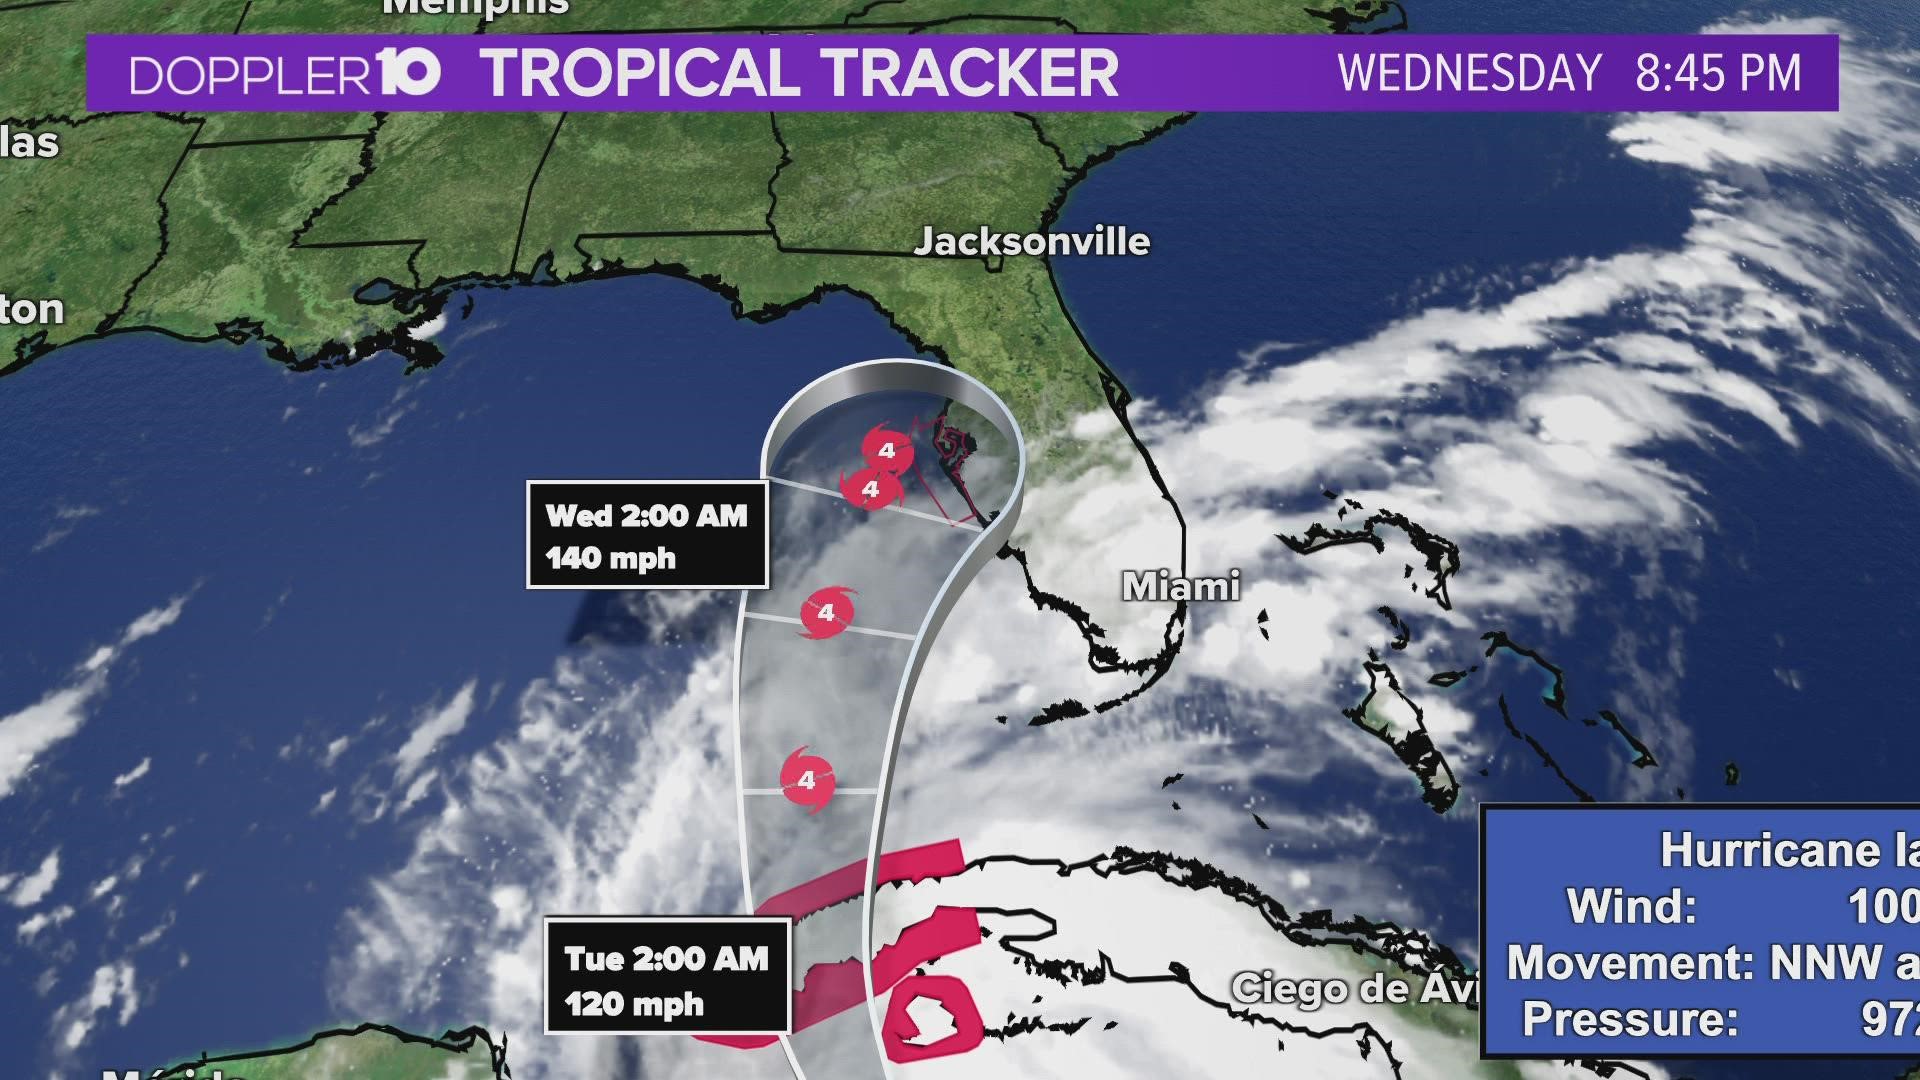 Hurricane Ian is nearing Cuba on a track to strike Florida as a Category 4 as early as Wednesday.